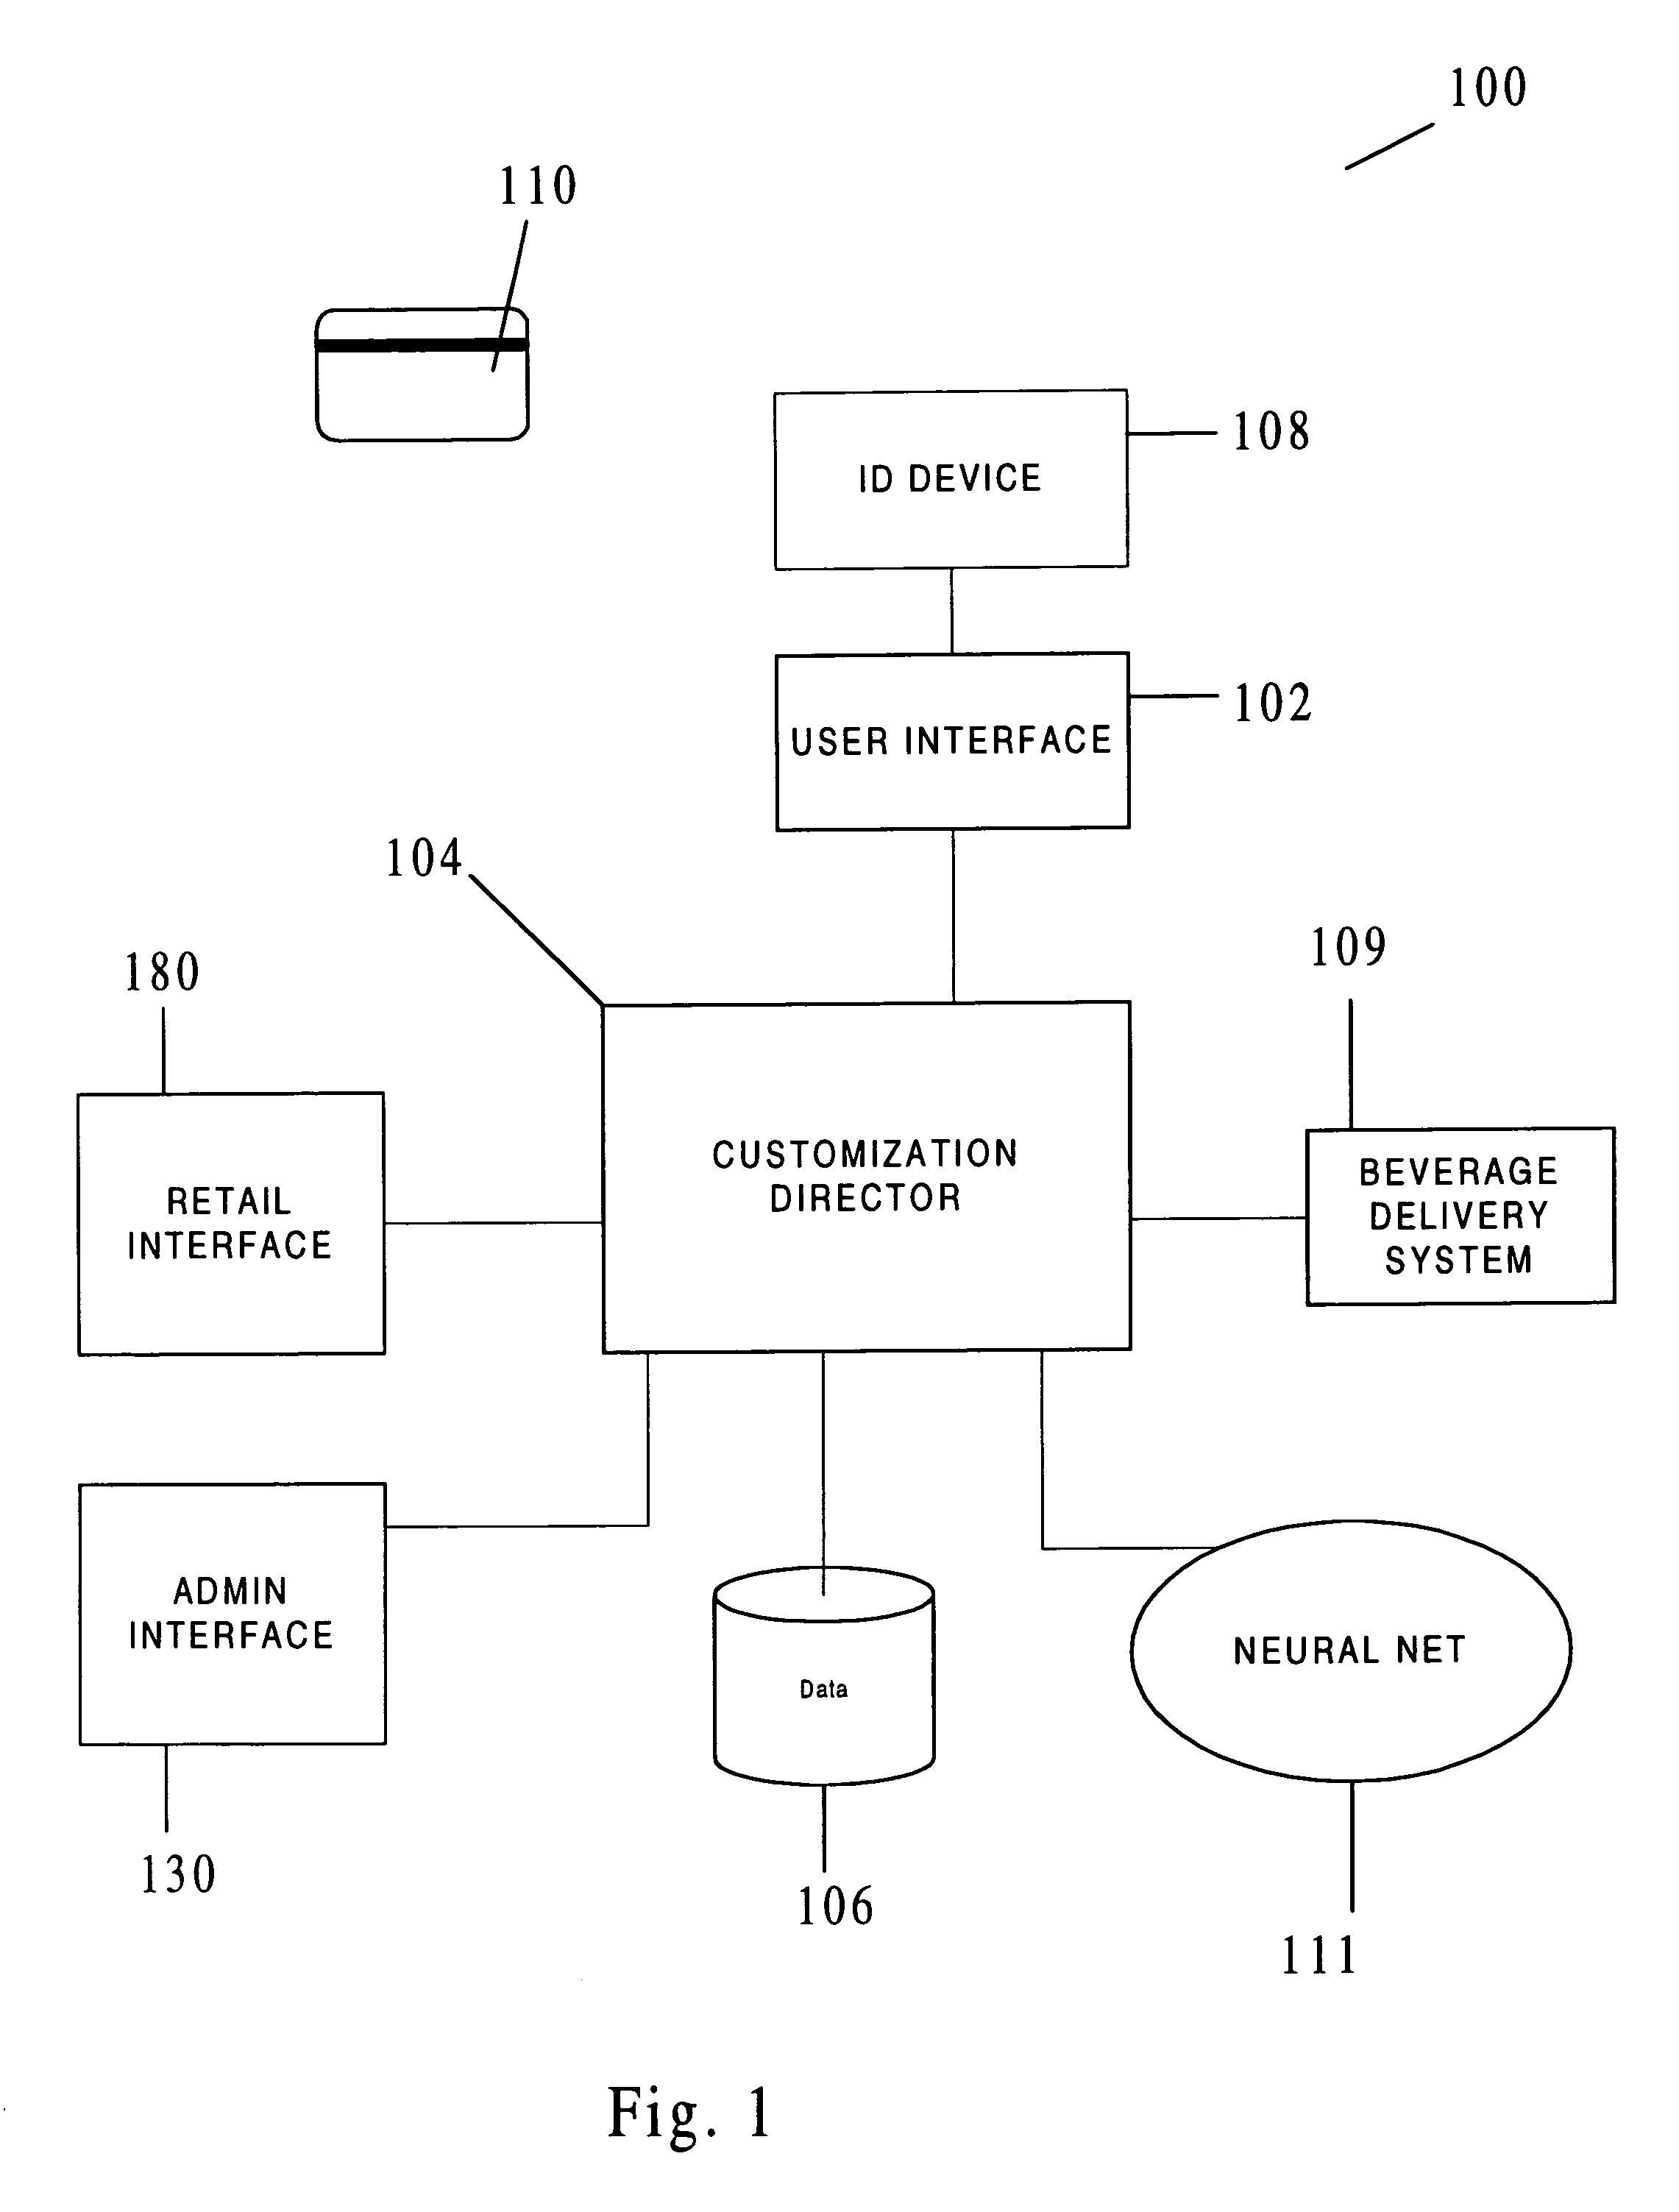 Methods for utilizing delayed dilution, mixing and filtering to provide customized varieties of fresh-brewed coffee on demand